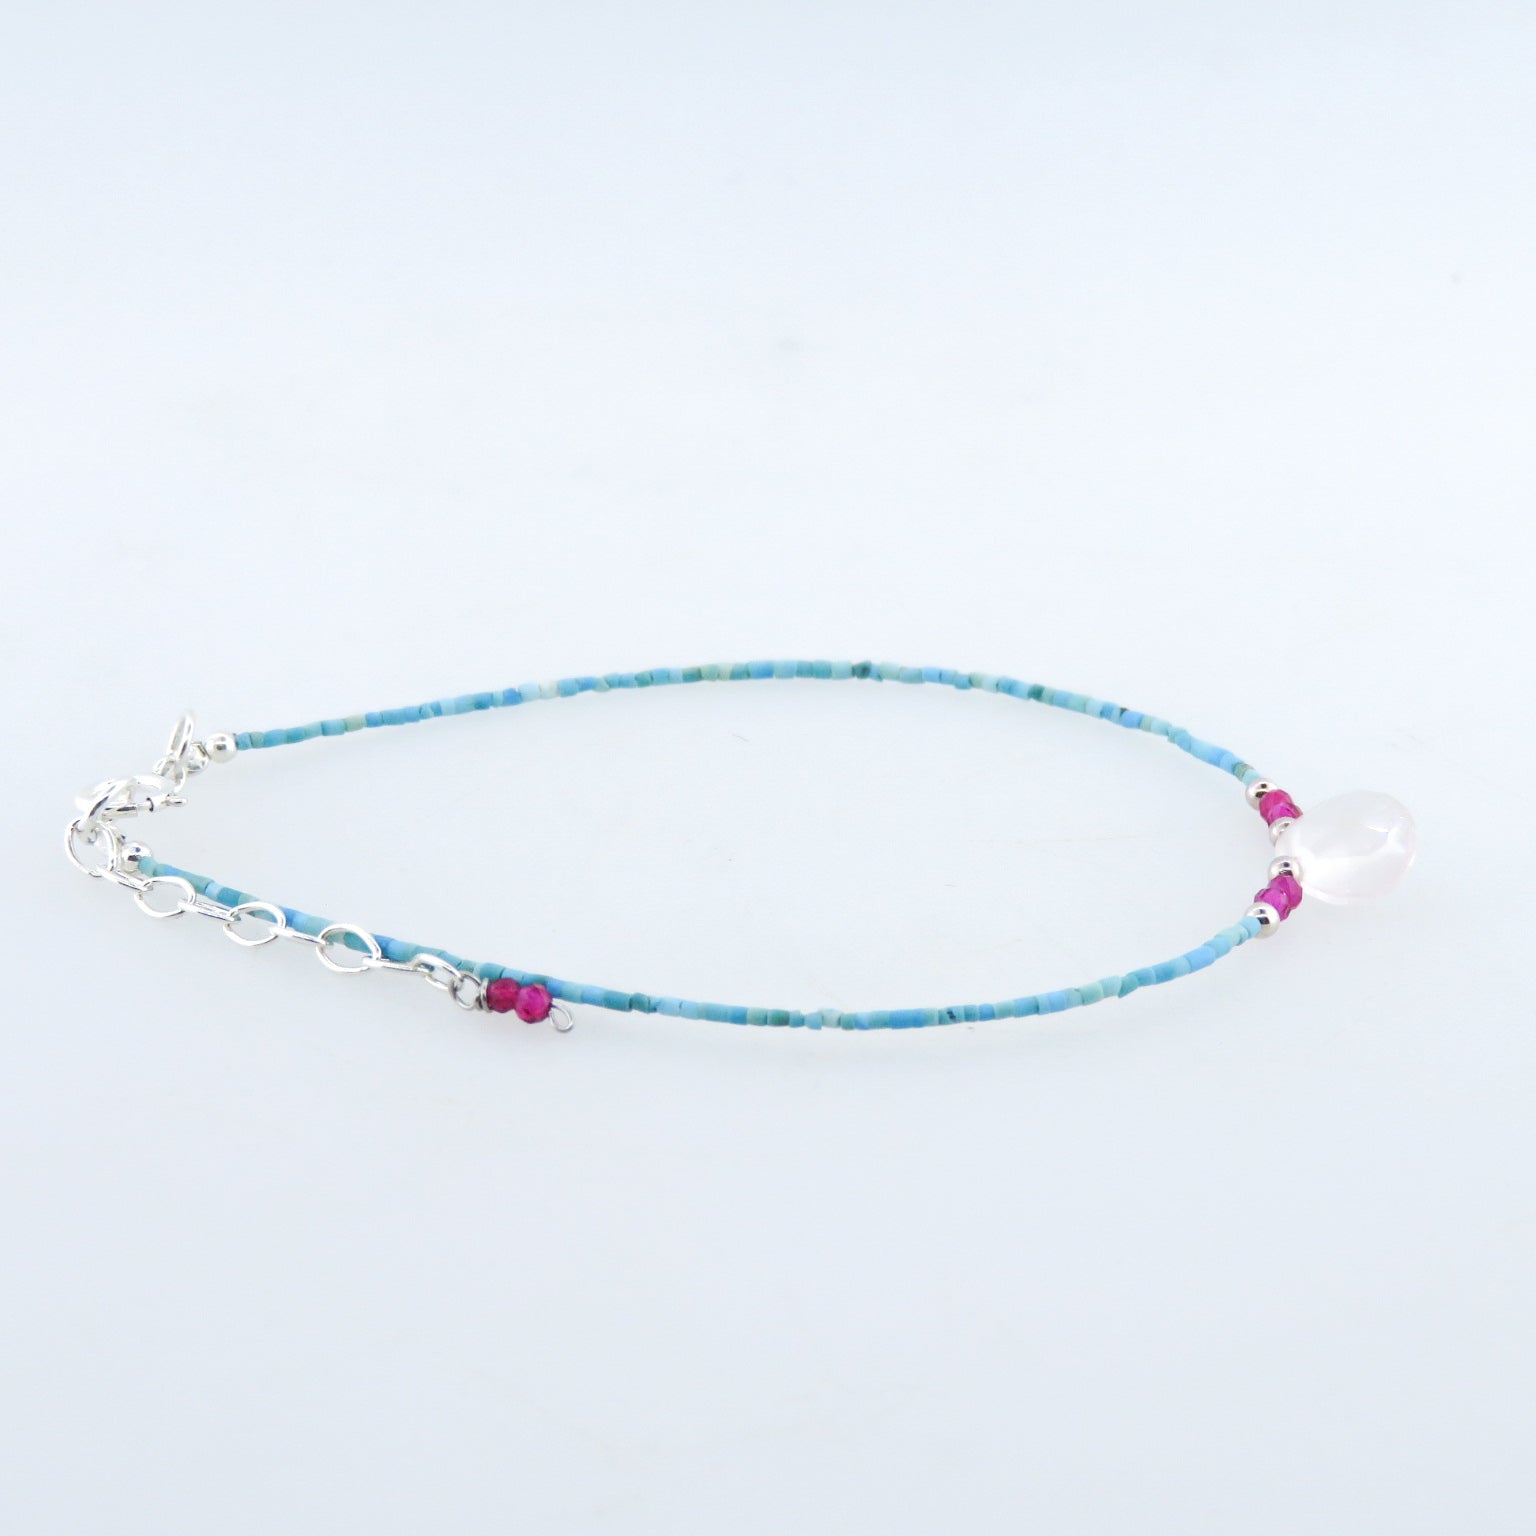 Turquoise Bracelet with Rose Quartz, Garnet and Silver Beads